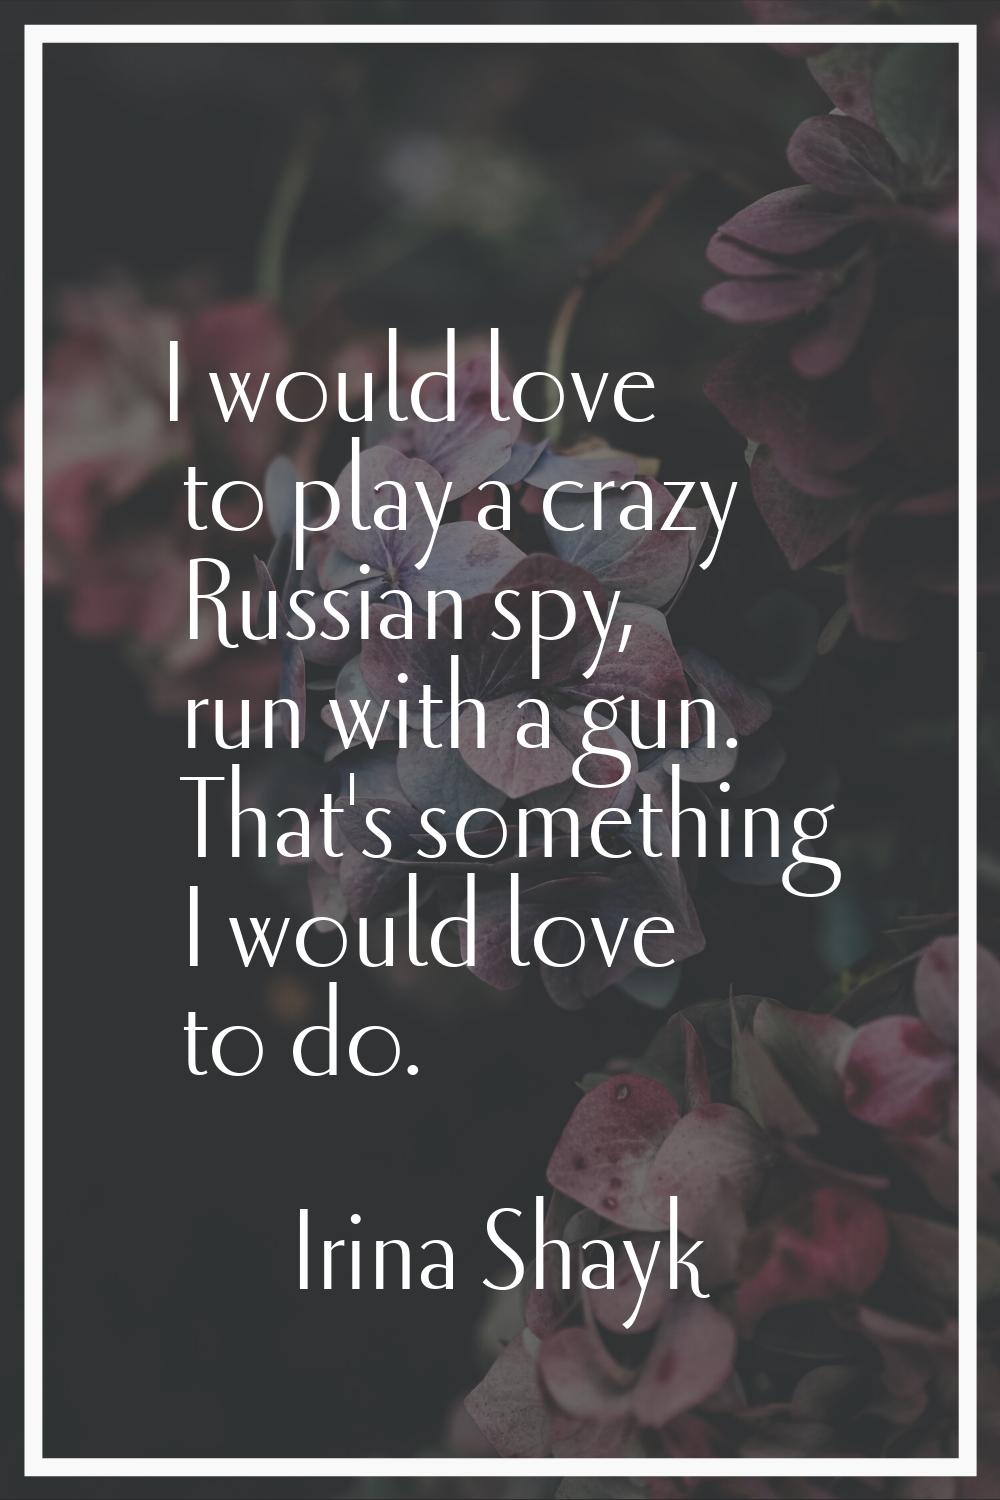 I would love to play a crazy Russian spy, run with a gun. That's something I would love to do.